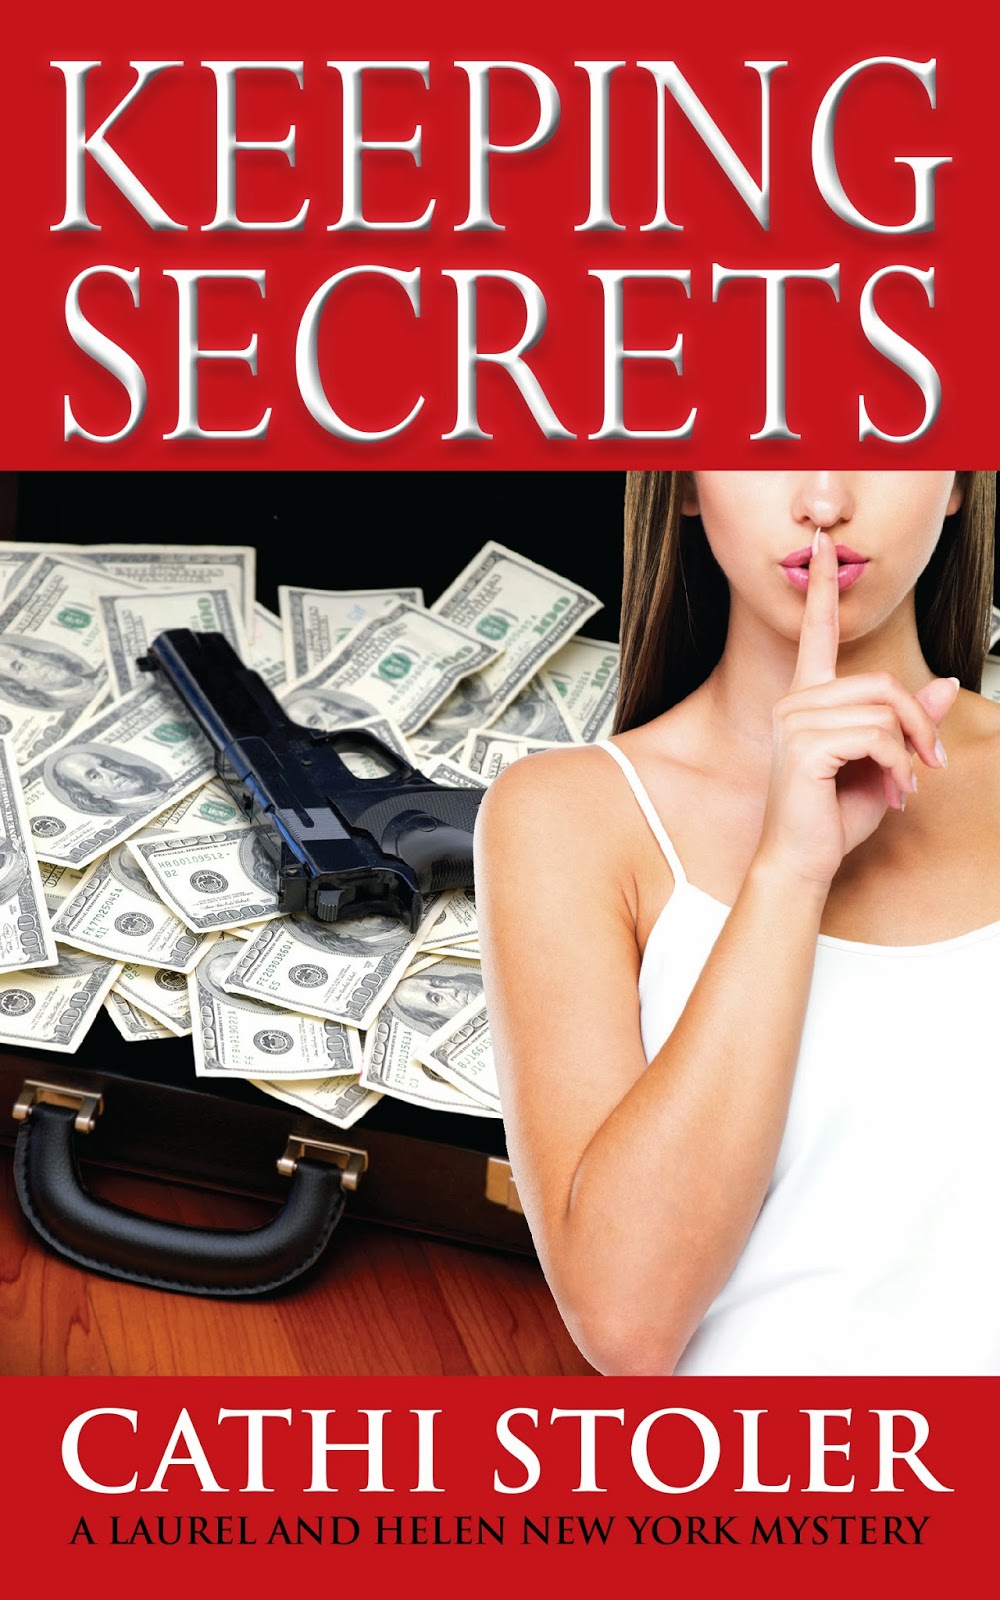 Cathi Stoler's KEEPING SECRETS Debuts Today.